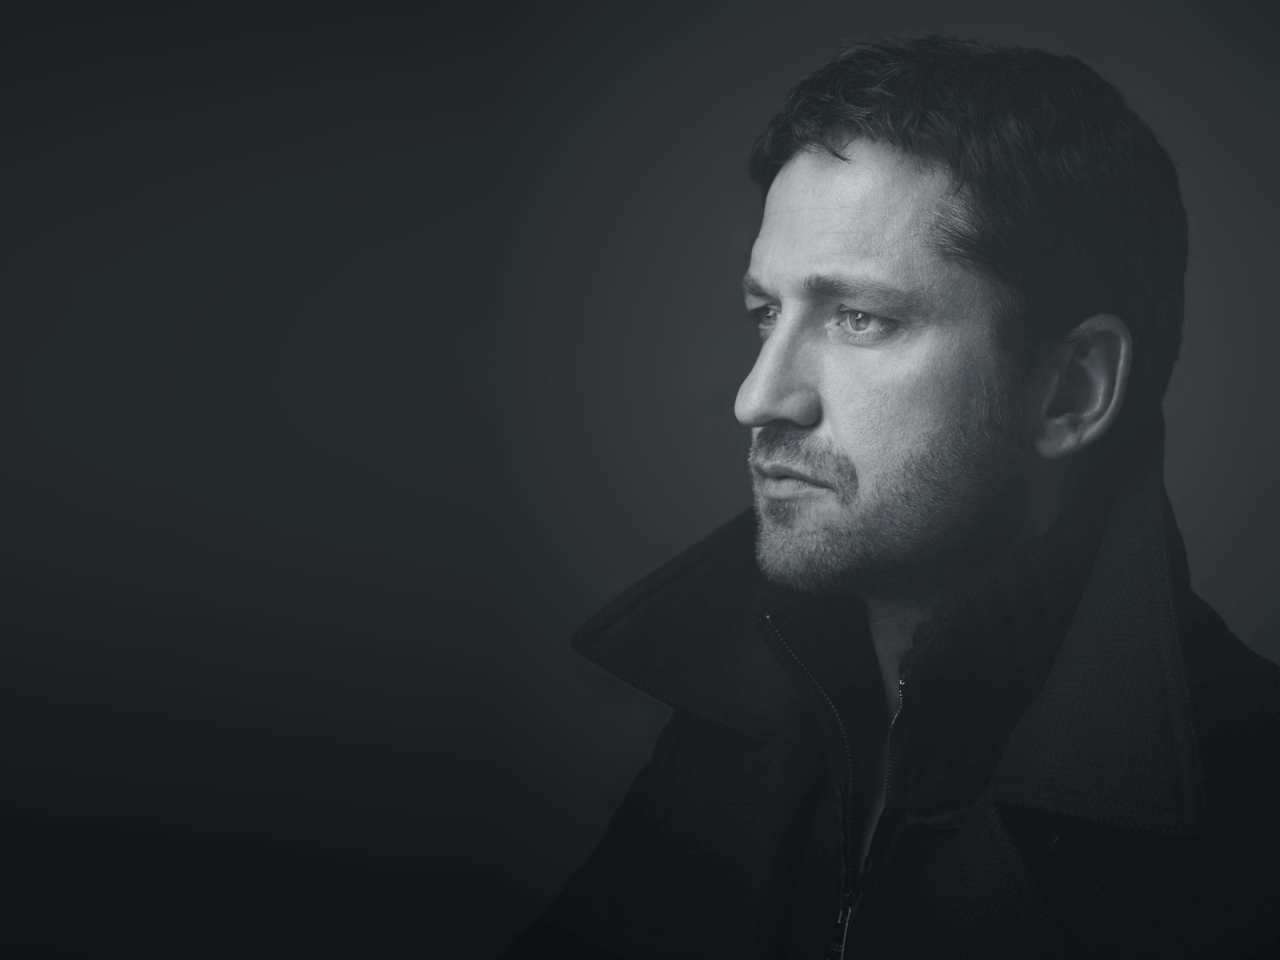 Thoughtful Gerard Butler for 1280 x 960 resolution